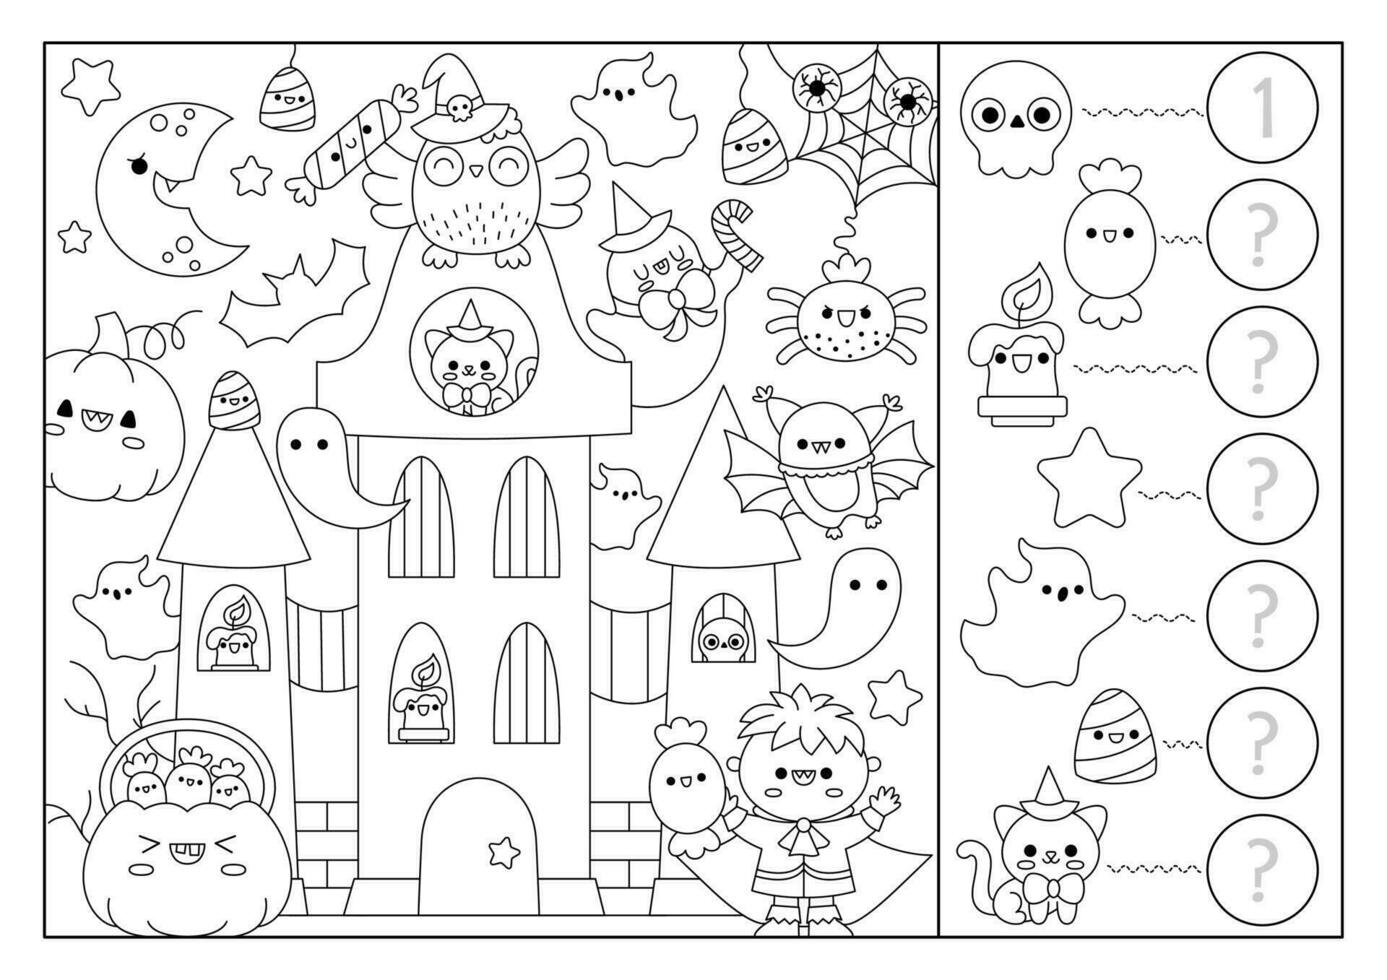 Vector black and white Halloween searching game with haunted house and kawaii characters. Spot hidden objects, say how many. Simple autumn holiday seek and find counting coloring page